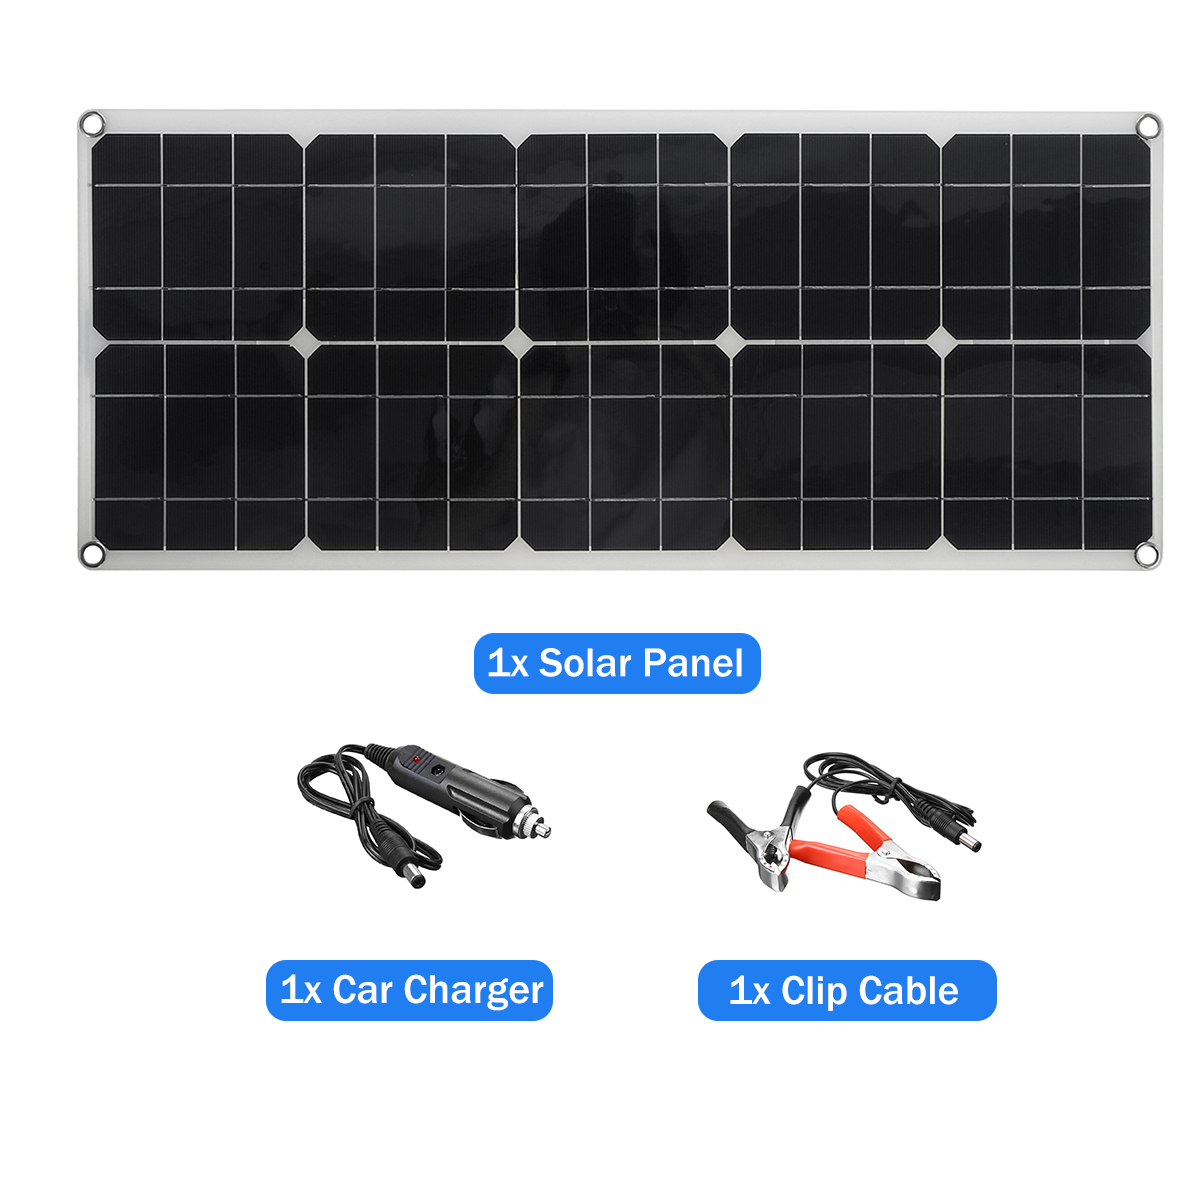 18V-Flexible-Solar-Panel-150W-5V-Dual-USB-Power-Bank-Solar-Panel-Kit-Complete-with-Controller-for-Ou-1757603-5